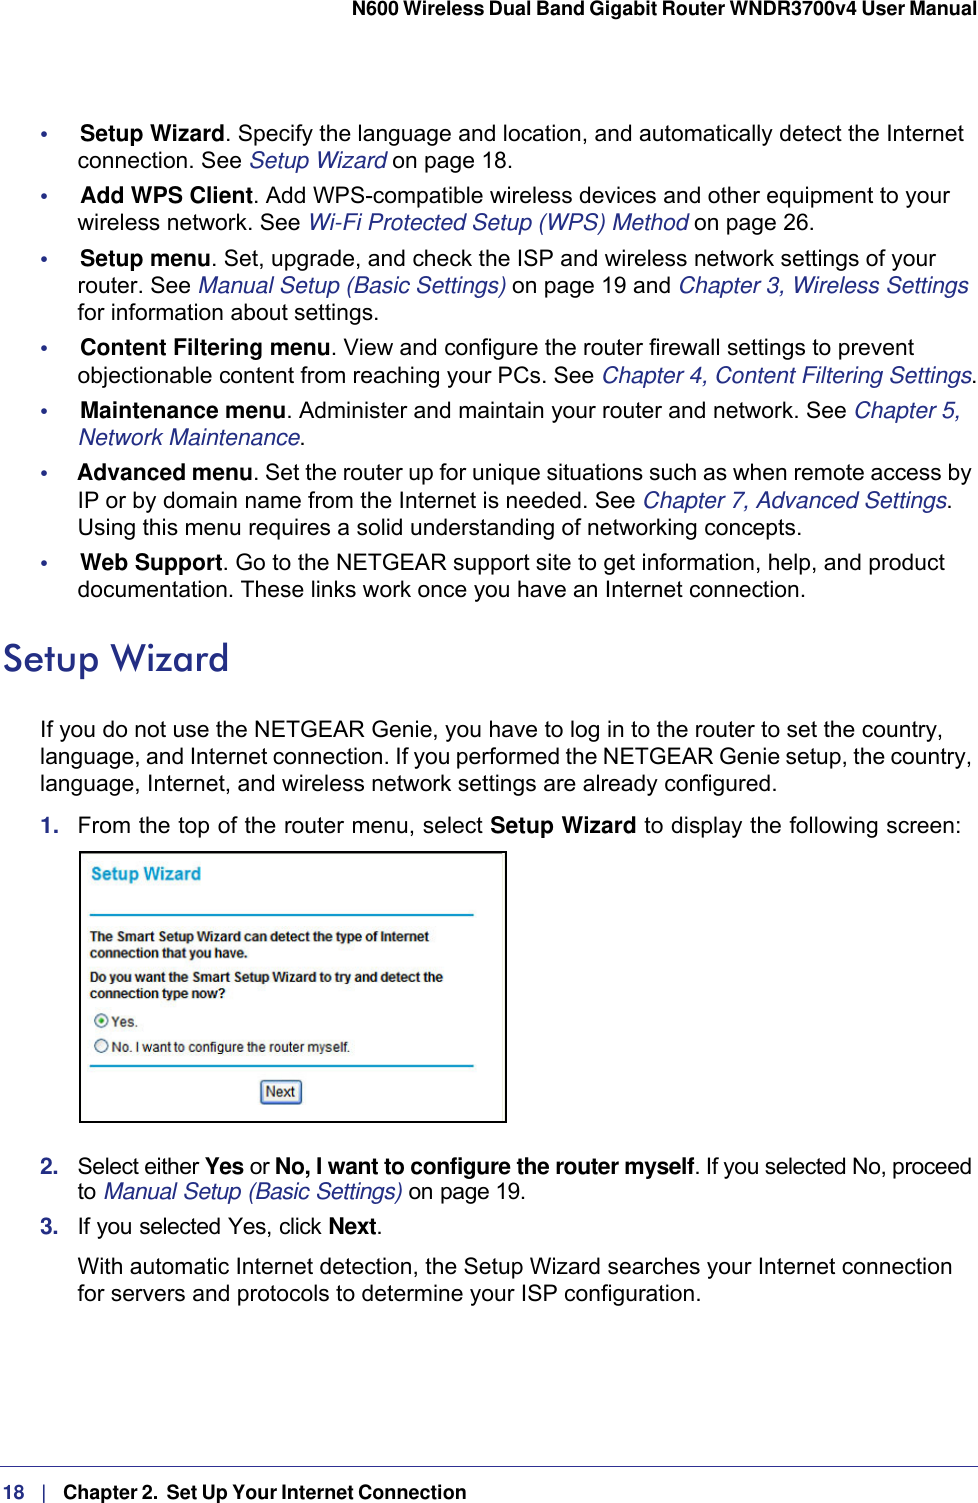 18   |   Chapter 2.  Set Up Your Internet Connection  N600 Wireless Dual Band Gigabit Router WNDR3700v4 User Manual •     Setup Wizard. Specify the language and location, and automatically detect the Internet connection. See Setup Wizard on page  18.•     Add WPS Client. Add WPS-compatible wireless devices and other equipment to your wireless network. See Wi-Fi Protected Setup (WPS) Method on page  26.•     Setup menu. Set, upgrade, and check the ISP and wireless network settings of your router. See Manual Setup (Basic Settings) on page  19 and Chapter 3, Wireless Settings for information about settings.•     Content Filtering menu. View and configure the router firewall settings to prevent objectionable content from reaching your PCs. See Chapter 4, Content Filtering Settings.•     Maintenance menu. Administer and maintain your router and network. See Chapter 5, Network Maintenance.•     Advanced menu. Set the router up for unique situations such as when remote access by IP or by domain name from the Internet is needed. See Chapter 7, Advanced Settings. Using this menu requires a solid understanding of networking concepts.•     Web Support. Go to the NETGEAR support site to get information, help, and product documentation. These links work once you have an Internet connection.Setup WizardIf you do not use the NETGEAR Genie, you have to log in to the router to set the country, language, and Internet connection. If you performed the NETGEAR Genie setup, the country, language, Internet, and wireless network settings are already configured.1.  From the top of the router menu, select Setup Wizard to display the following screen: 2.  Select either Yes or No, I want to configure the router myself. If you selected No, proceed to Manual Setup (Basic Settings) on page 19. 3.  If you selected Yes, click Next.With automatic Internet detection, the Setup Wizard searches your Internet connection for servers and protocols to determine your ISP configuration.